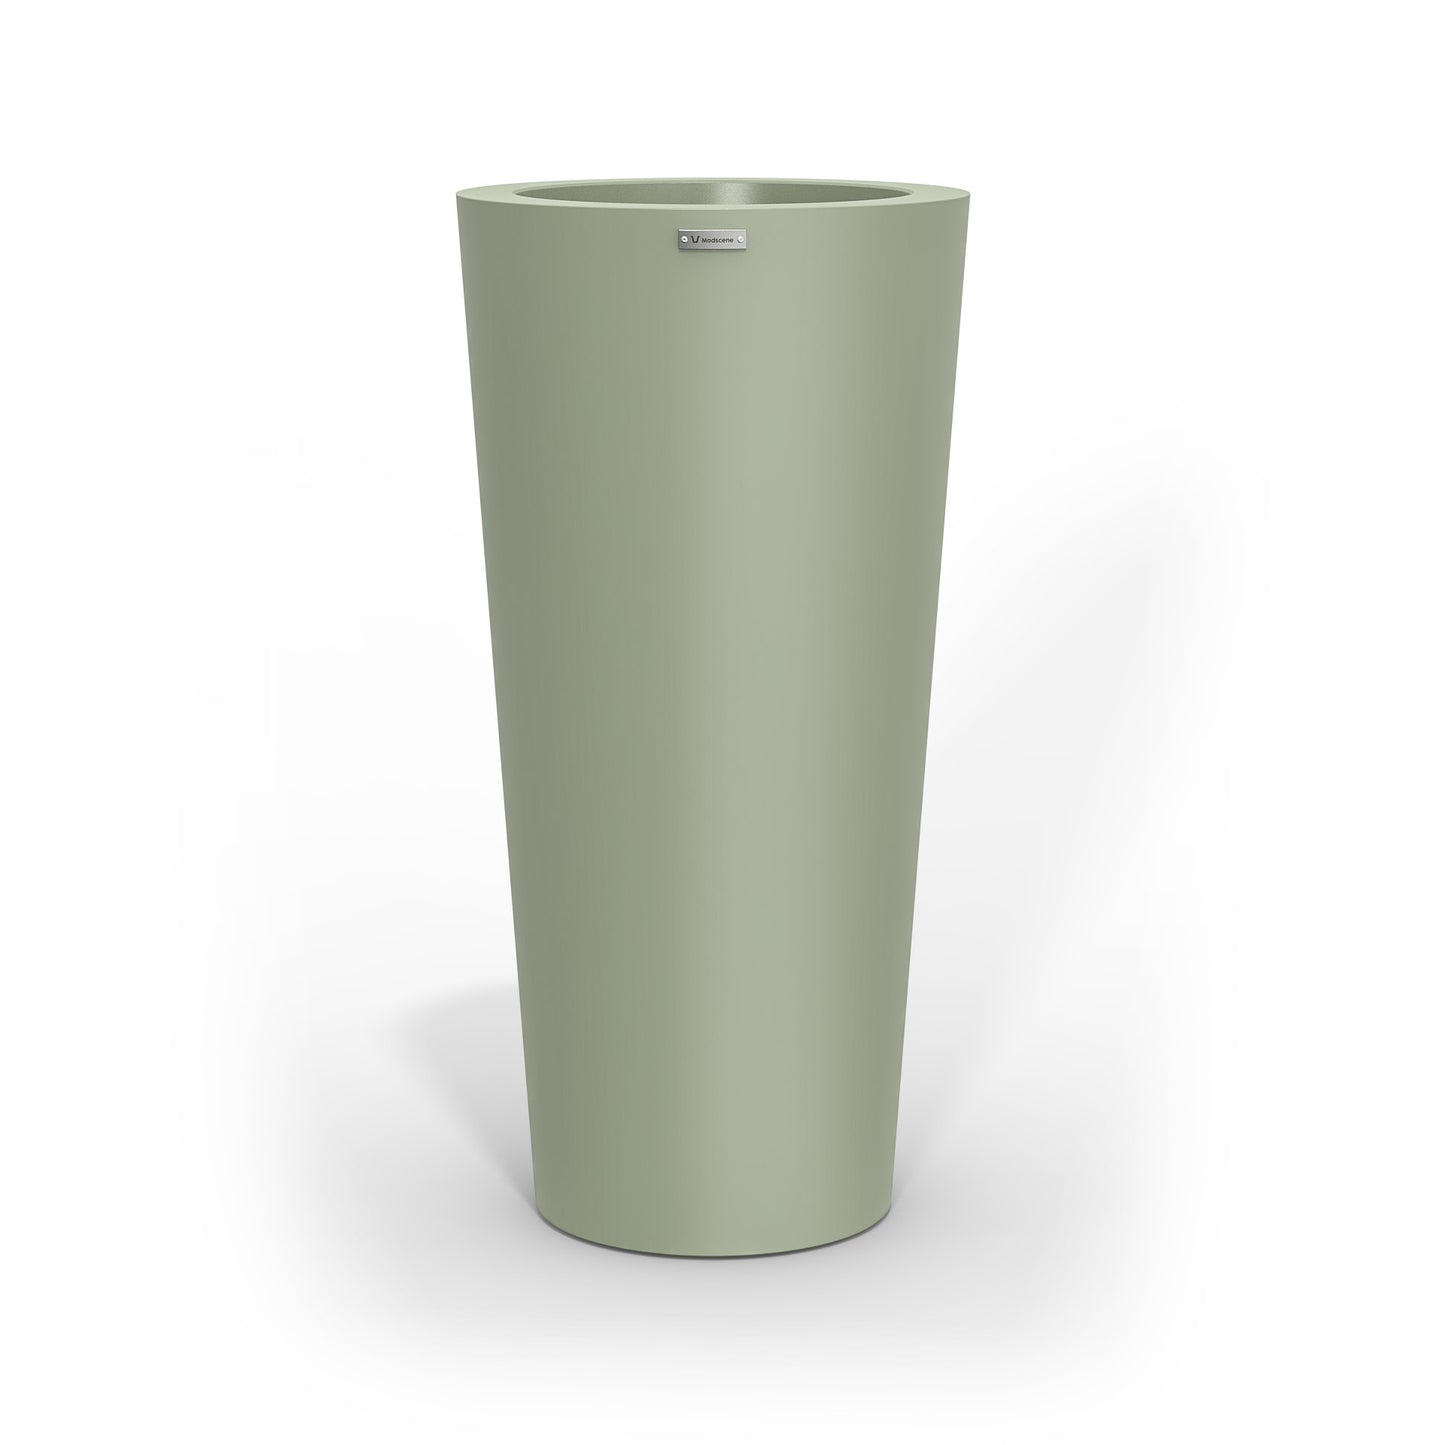 A tall Modscene planter pot in a pastel green colour. New Zealand made.